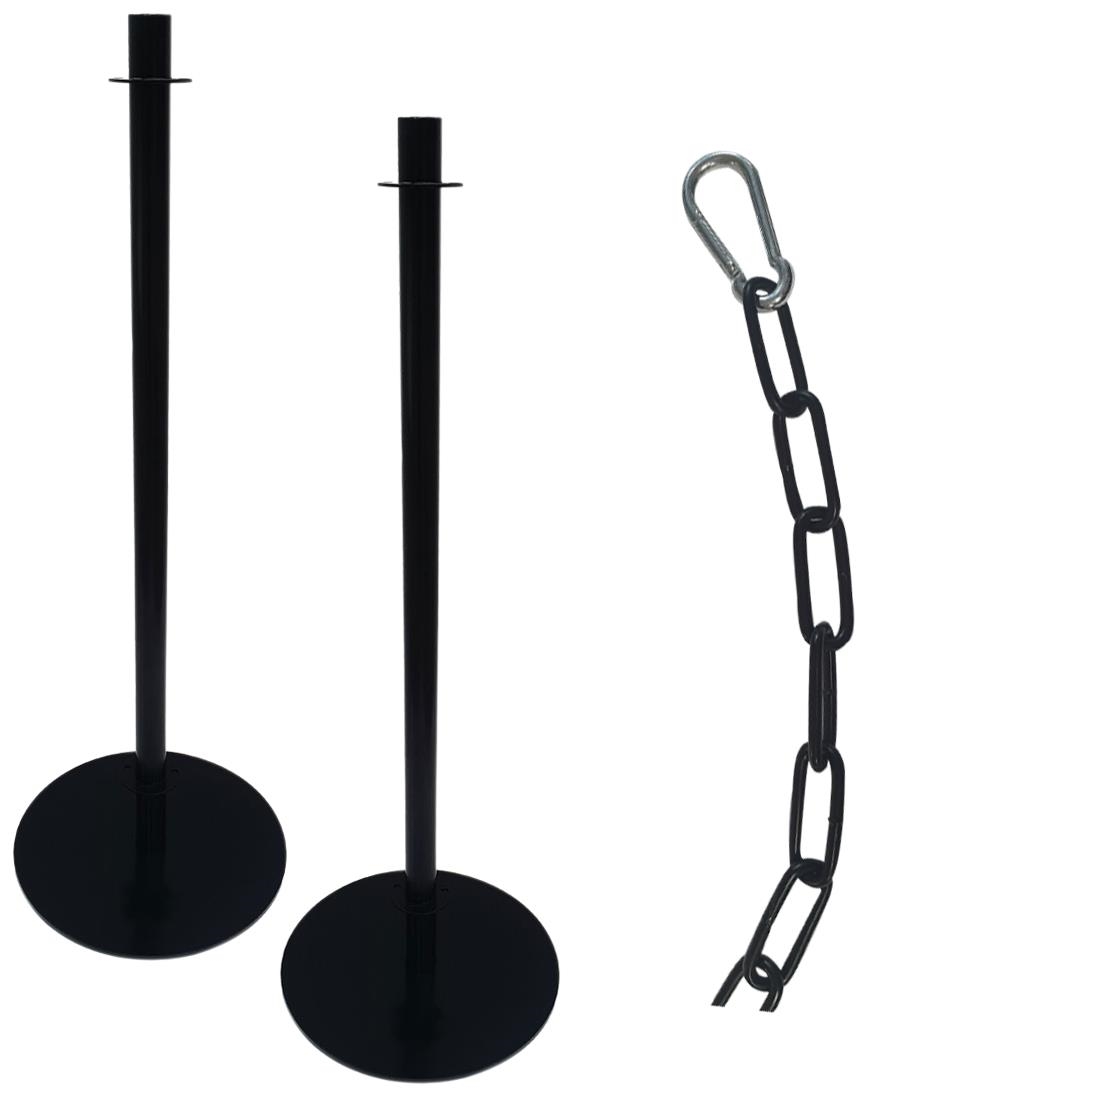 Special Offer Bolero 1.5m Black-Plated Barrier Chain and Barrier Posts